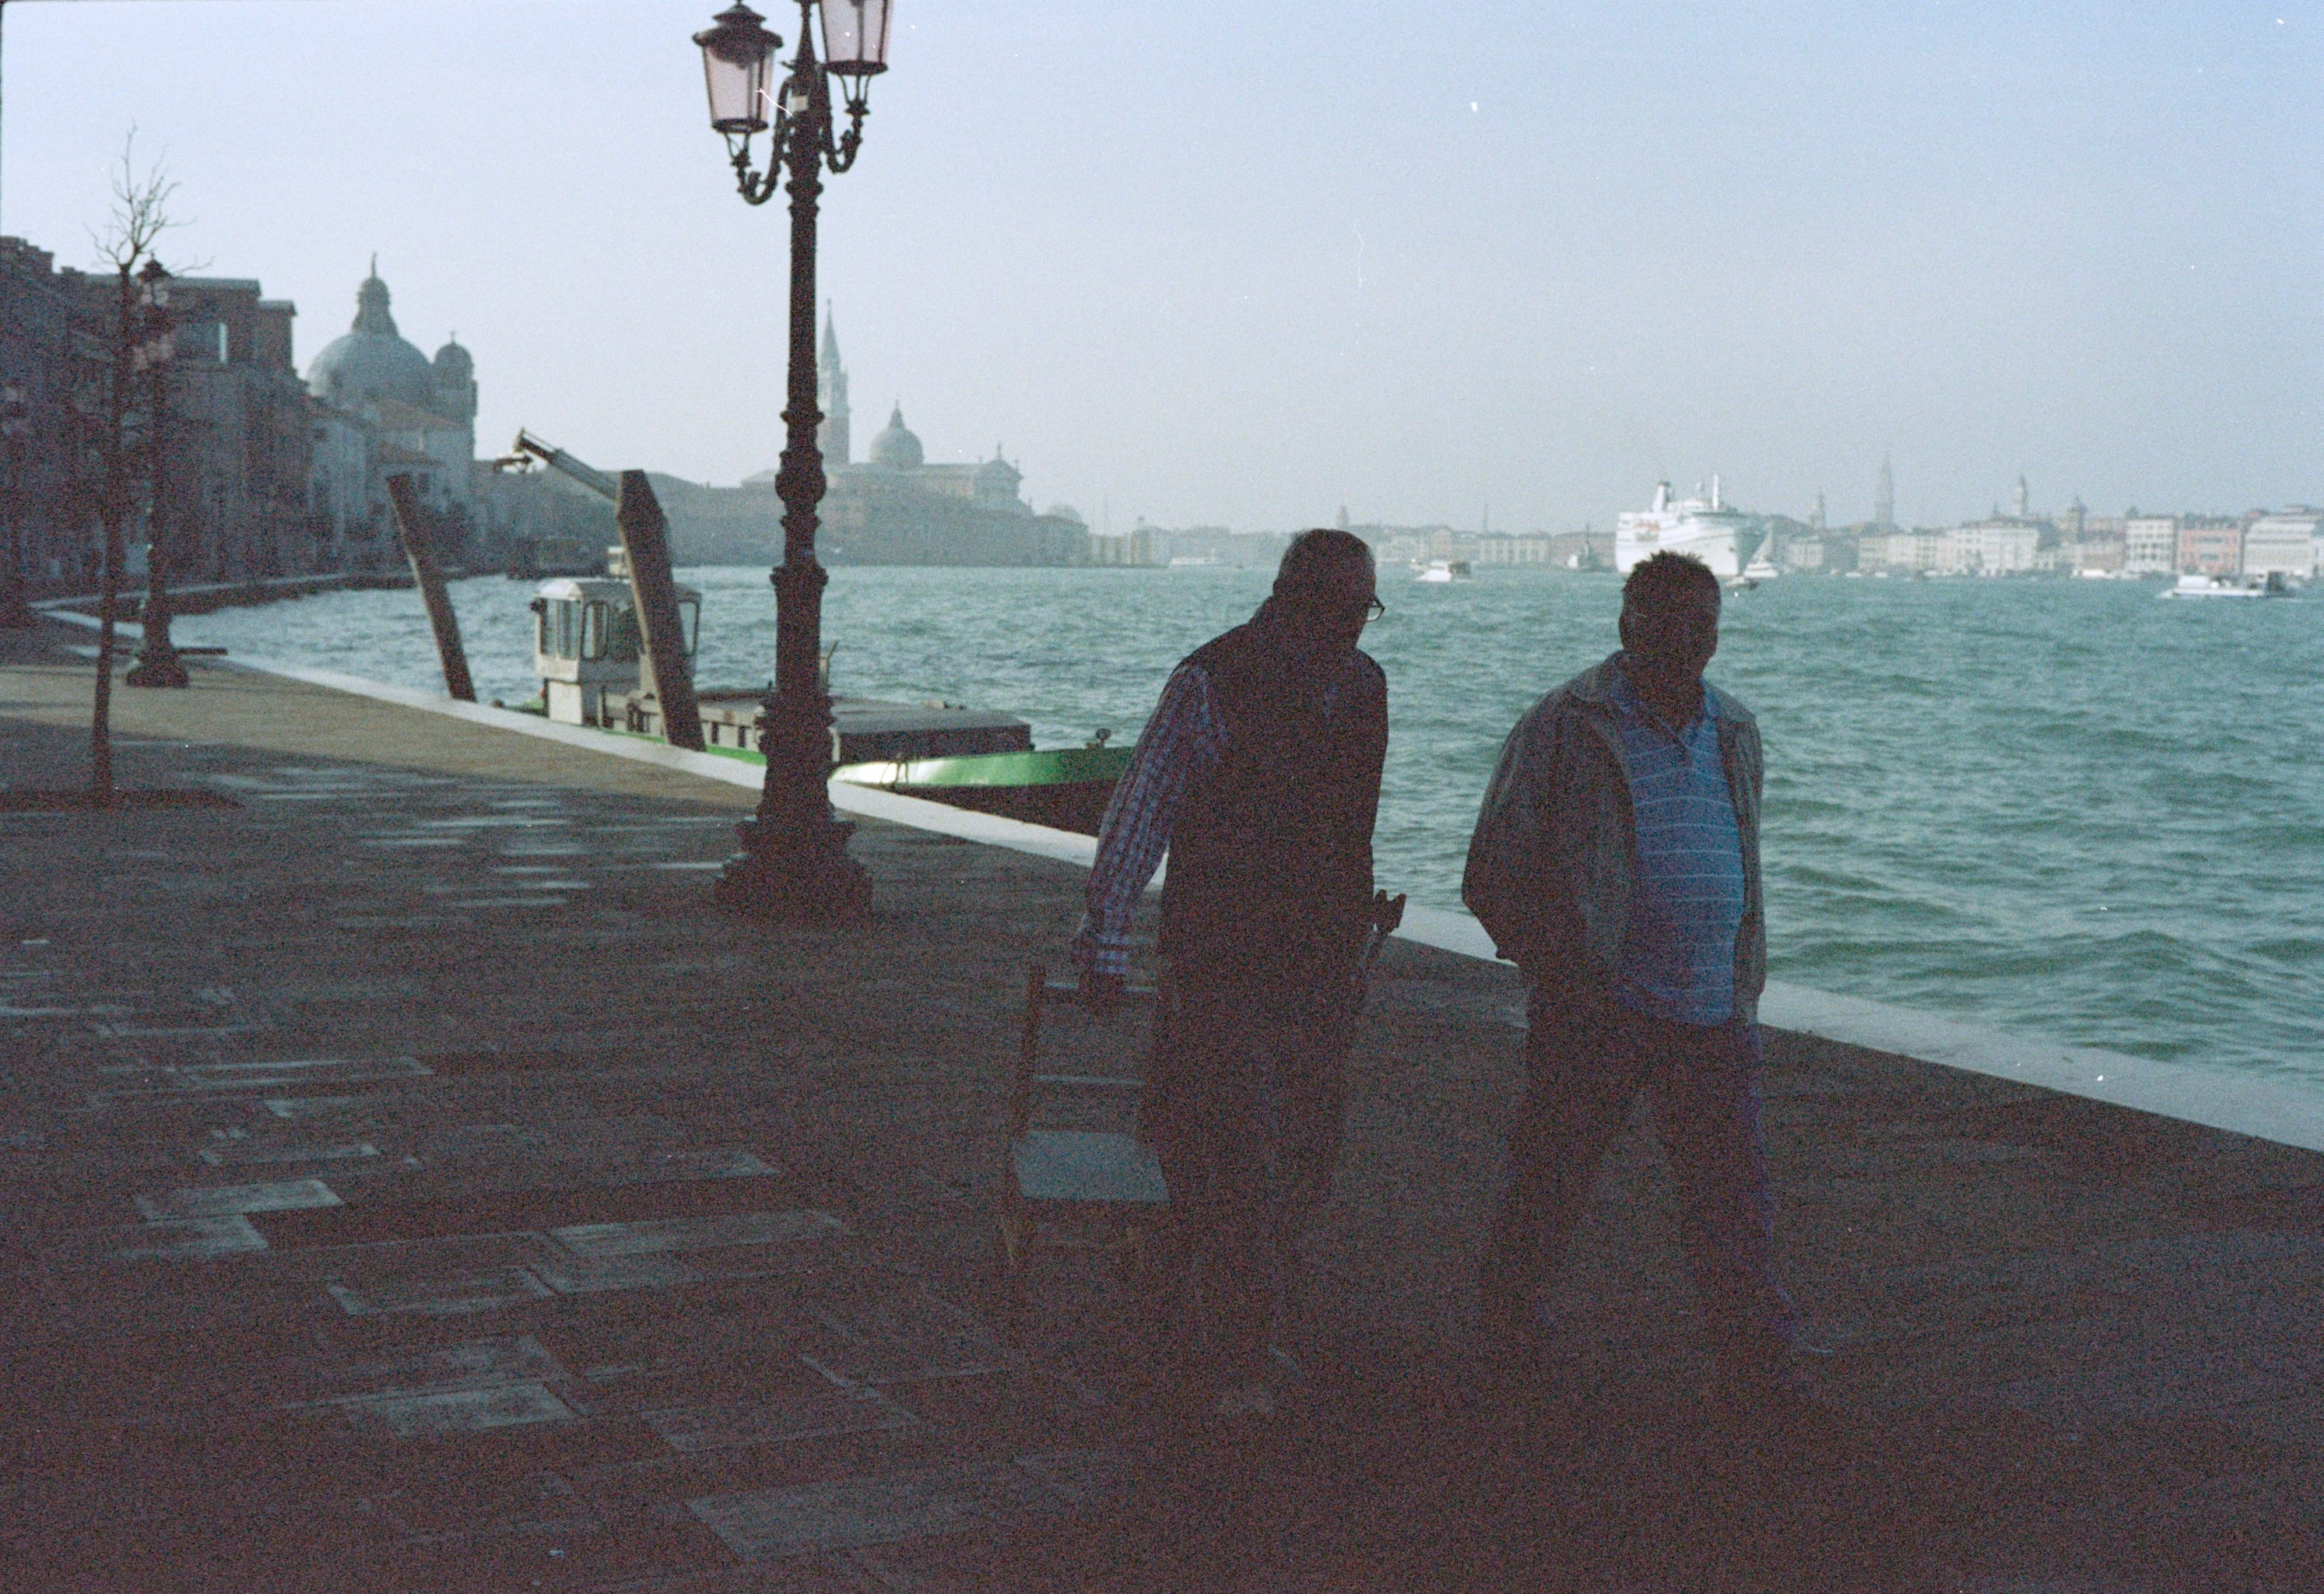 A couple of men drag some chairs along a street in Venice next to a canal.